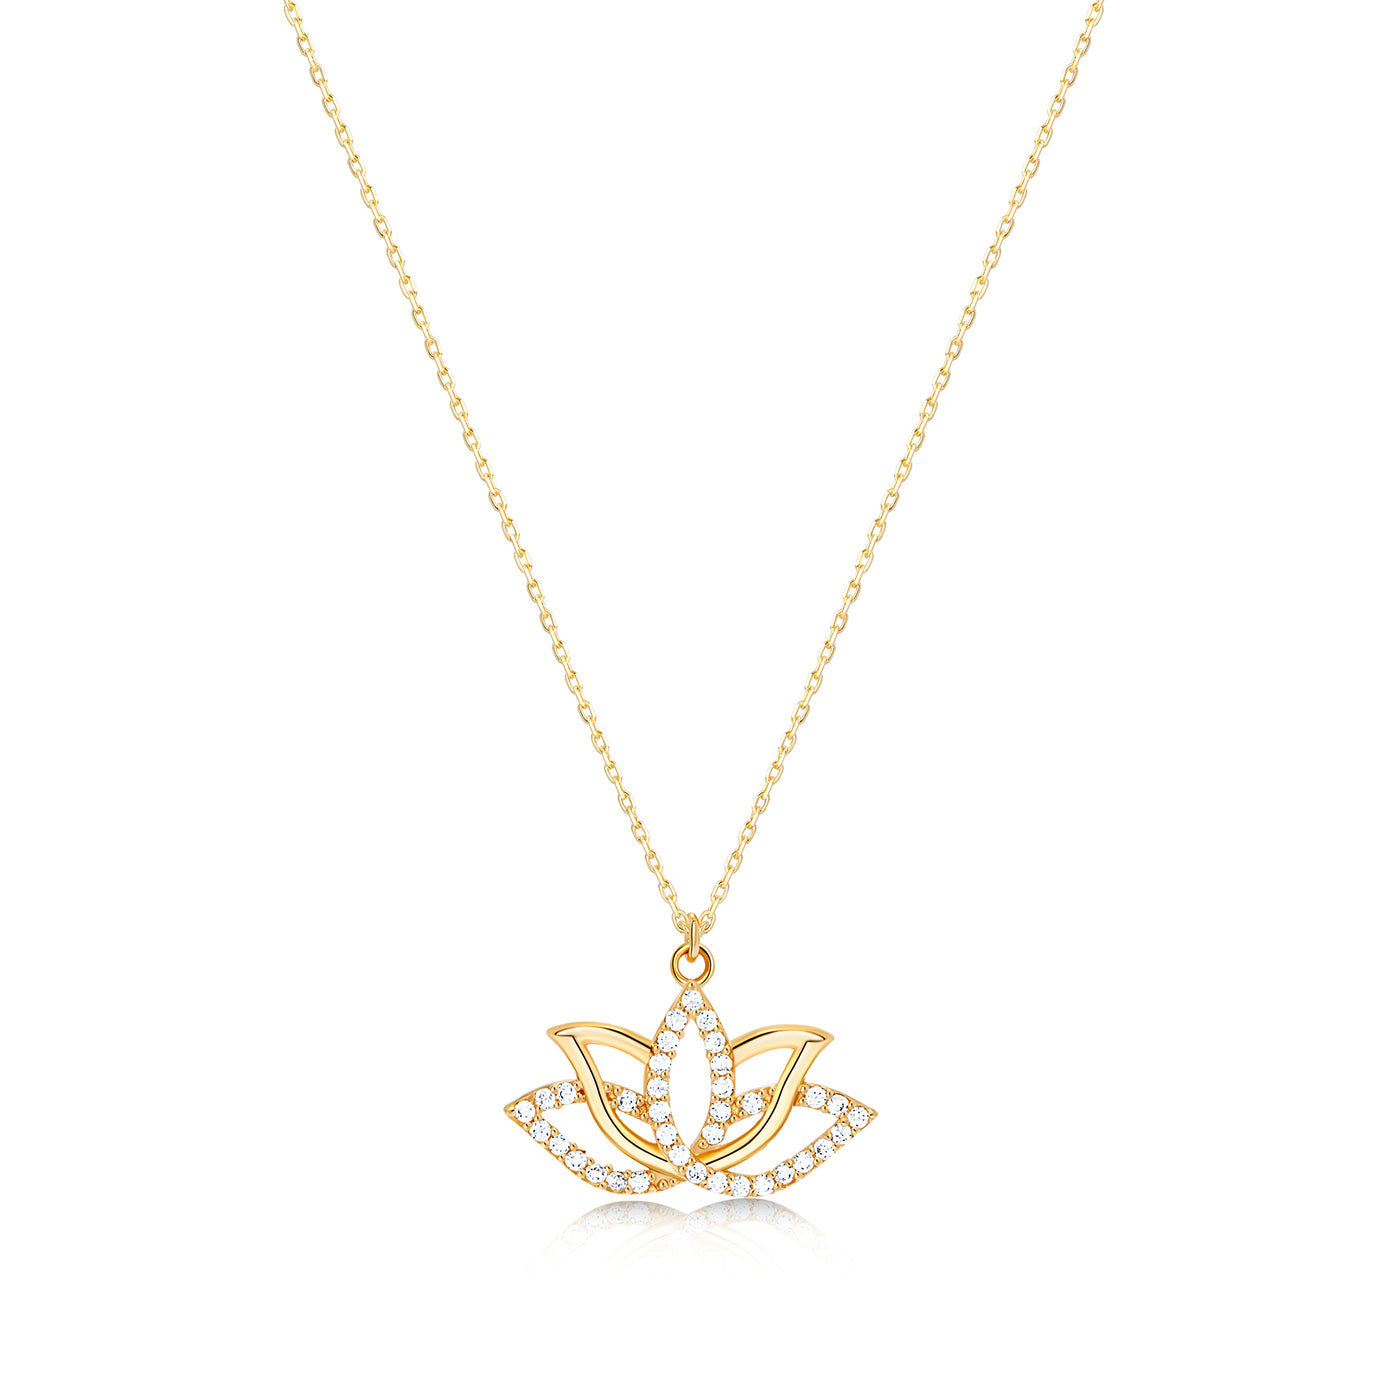 Lotus Flower Necklace 14k 8k and Silver